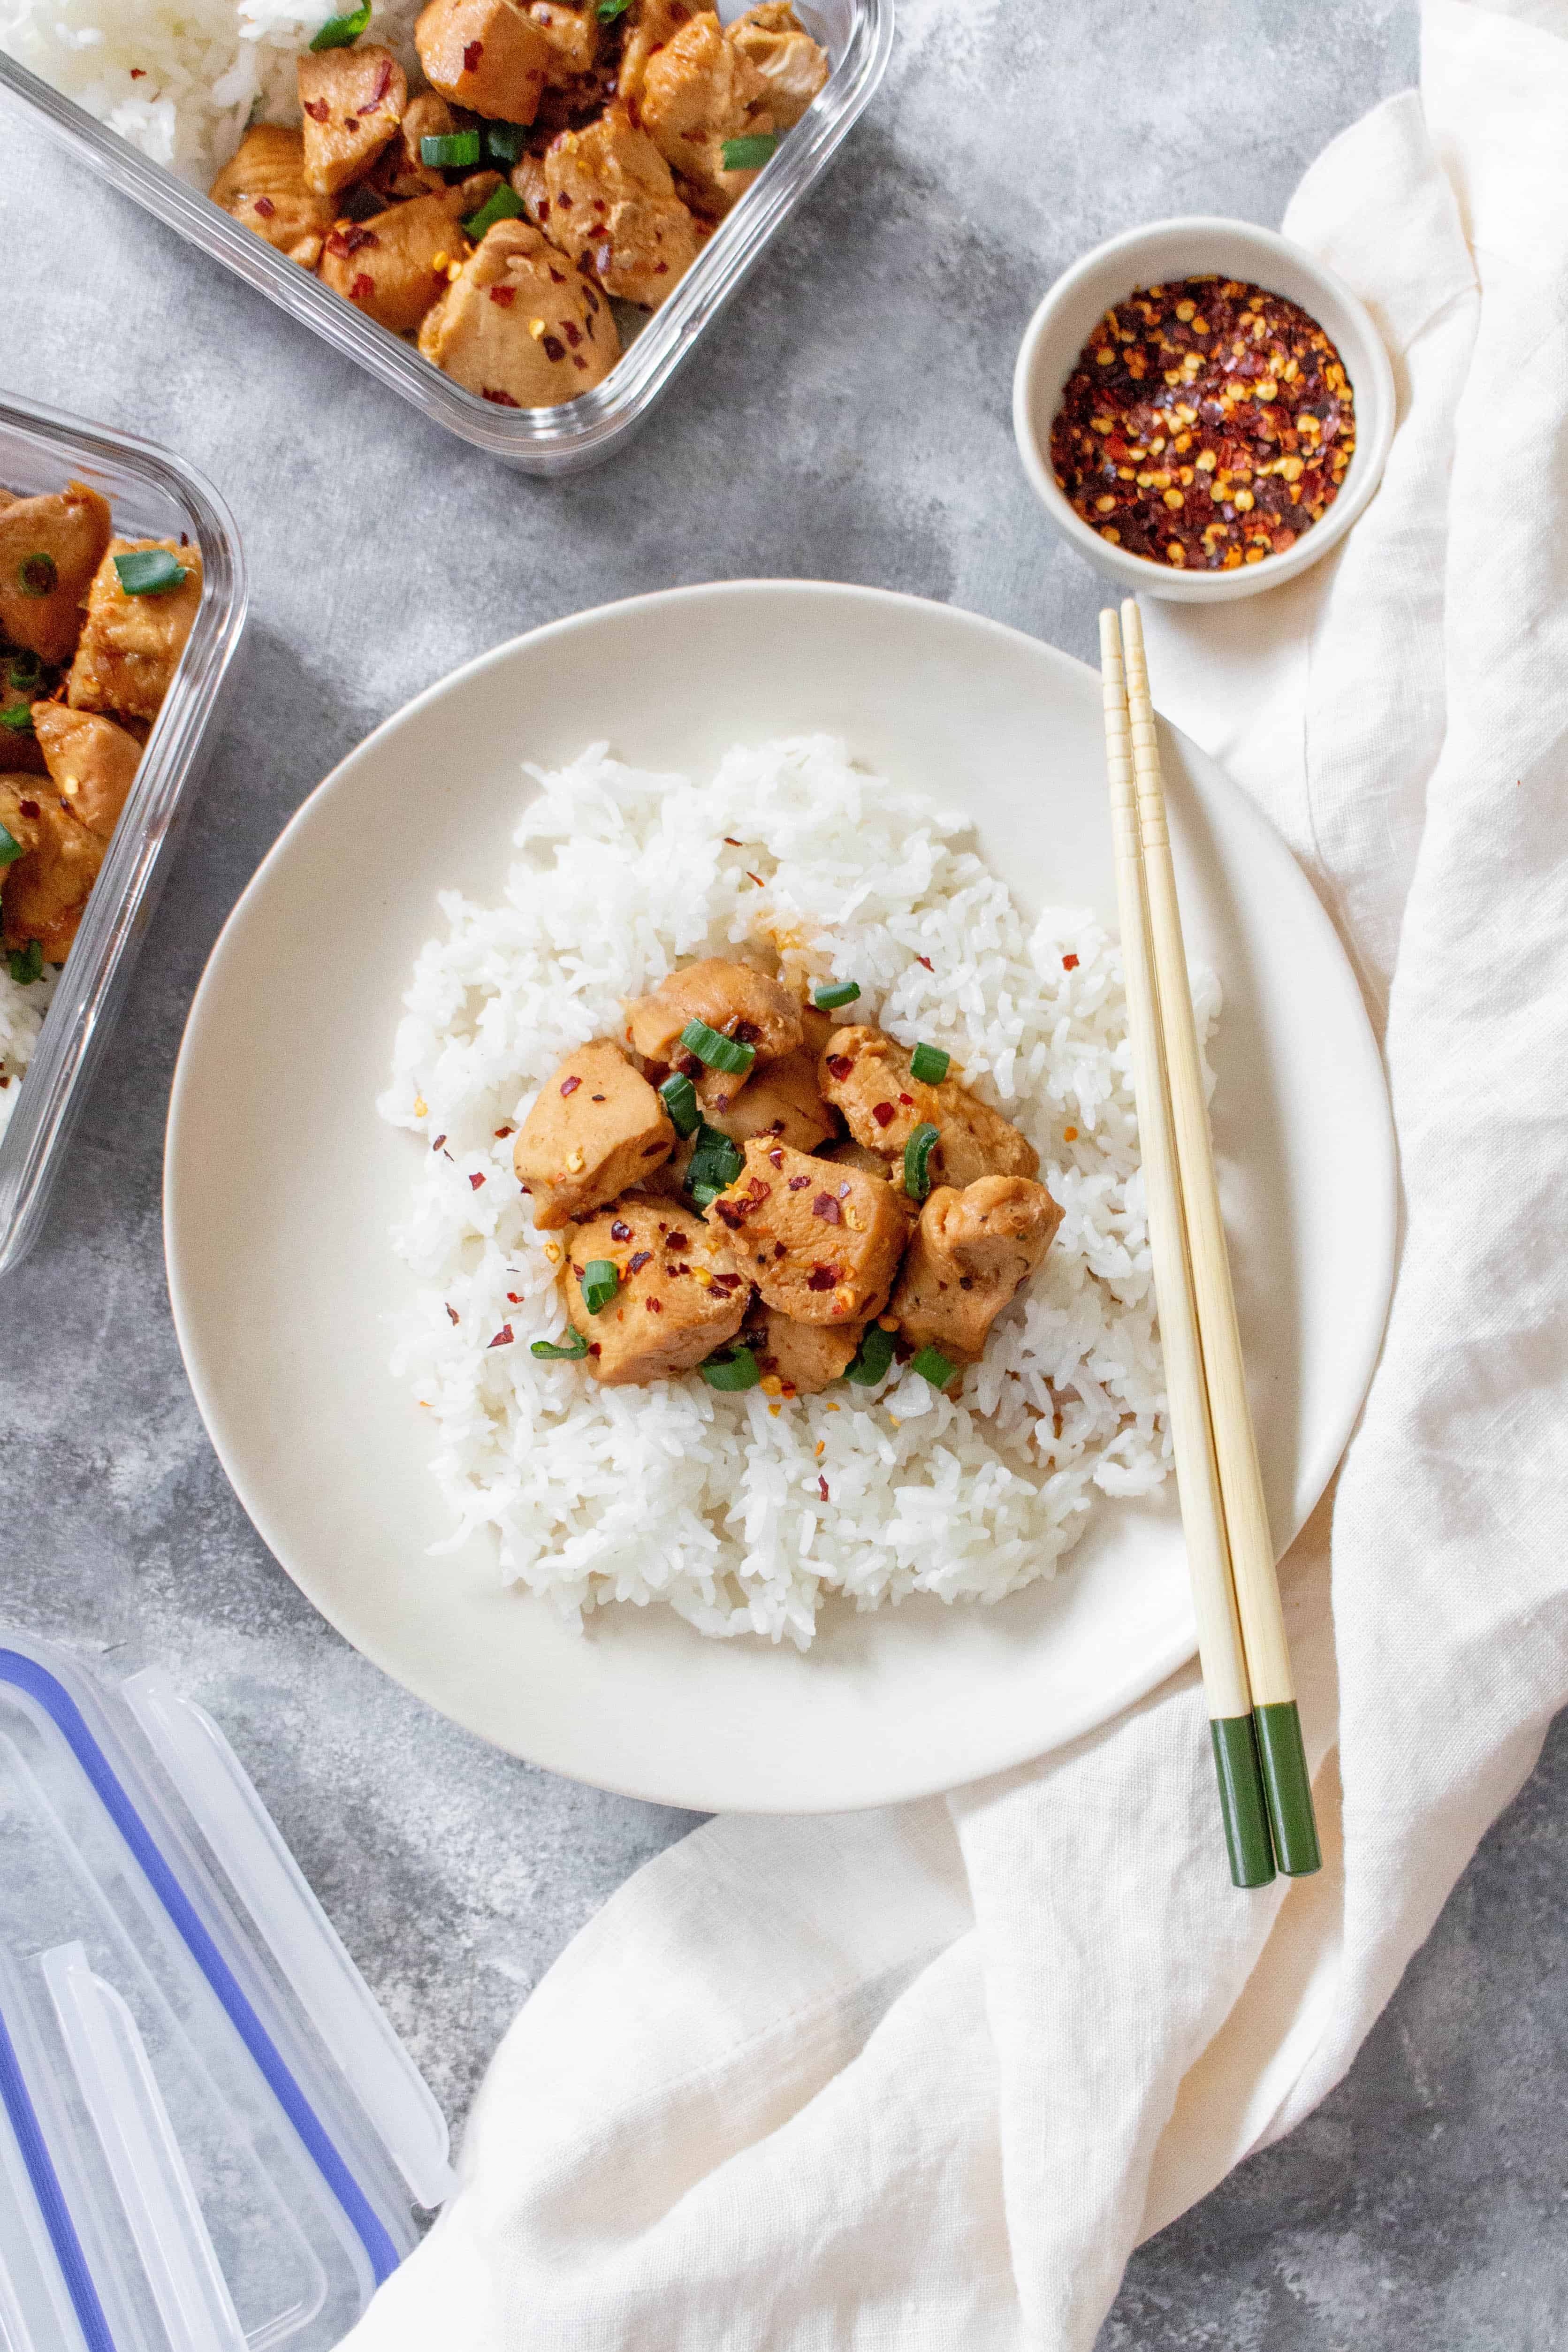 Skip the take out and make this Instant Pot Spicy Honey Garlic Chicken at home!